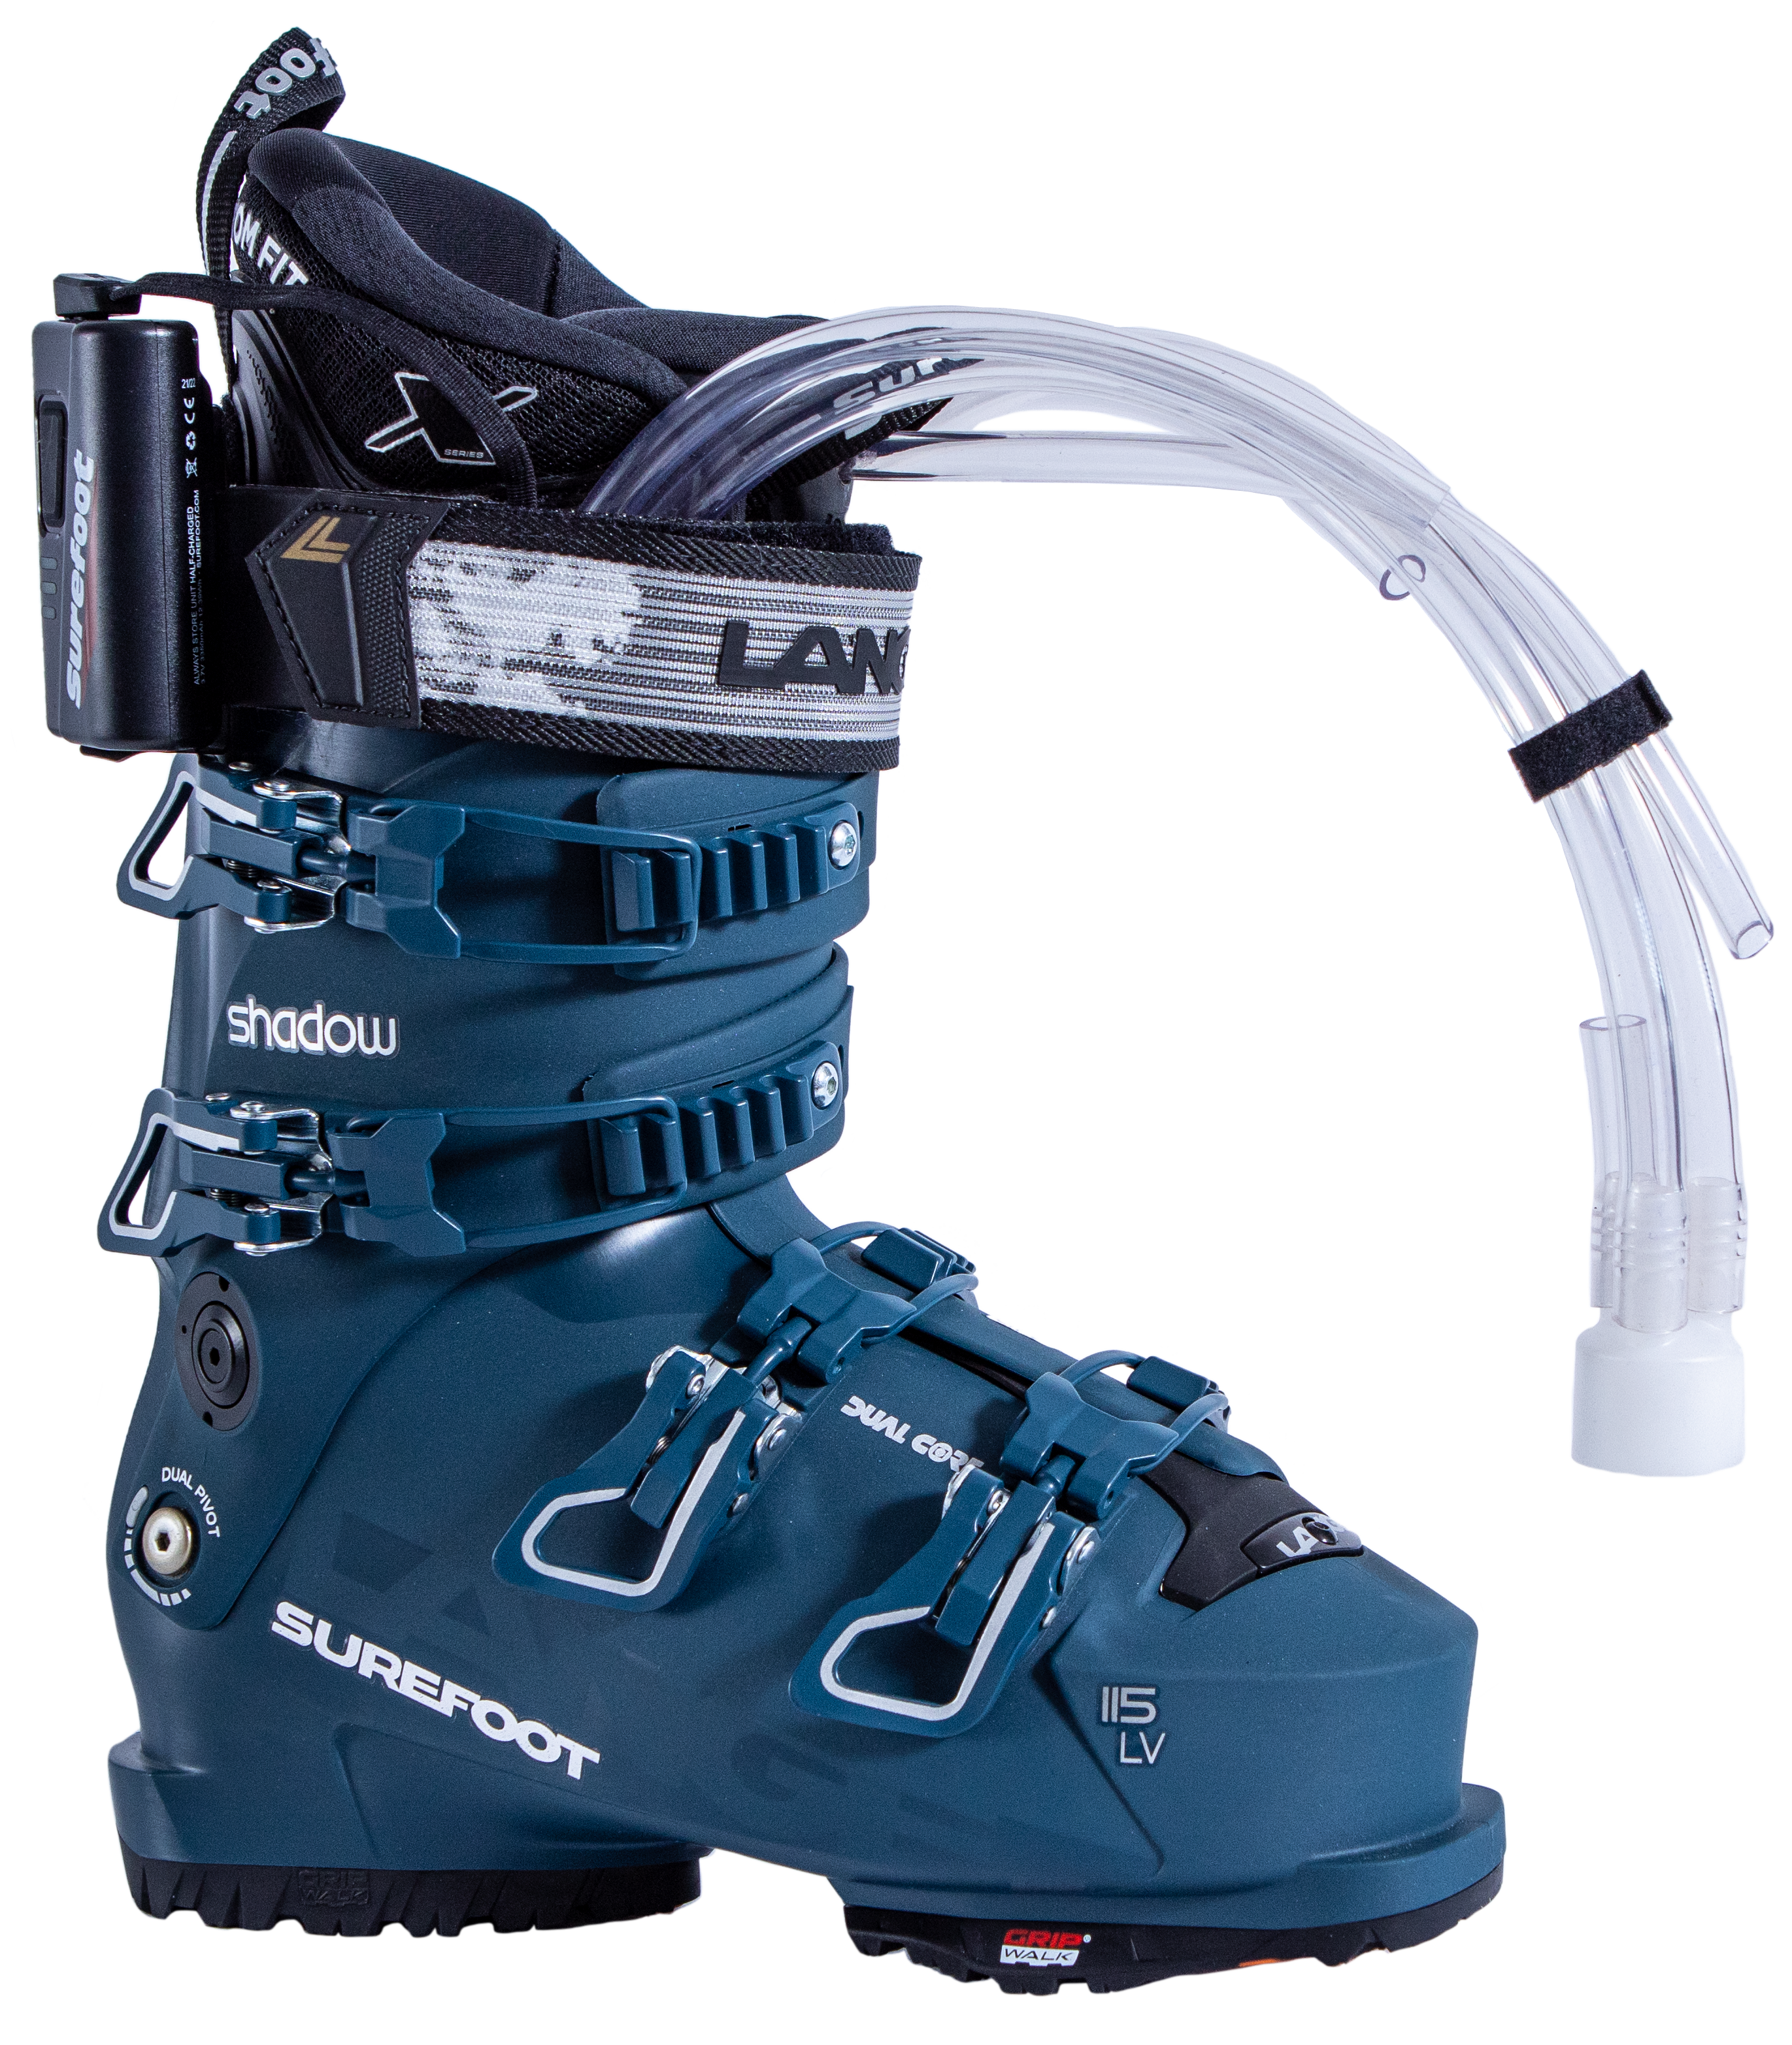 Surefoot Lange Shadow 115 LV matte blue ski boot shell with white/silver accents on buckles and Lange logo in black on power strap, Surefoot logo in white. Plastic tubes coming out for Surefoot memory foam injection into shell lining. Winterheat ski boot heater attached to outside edge.